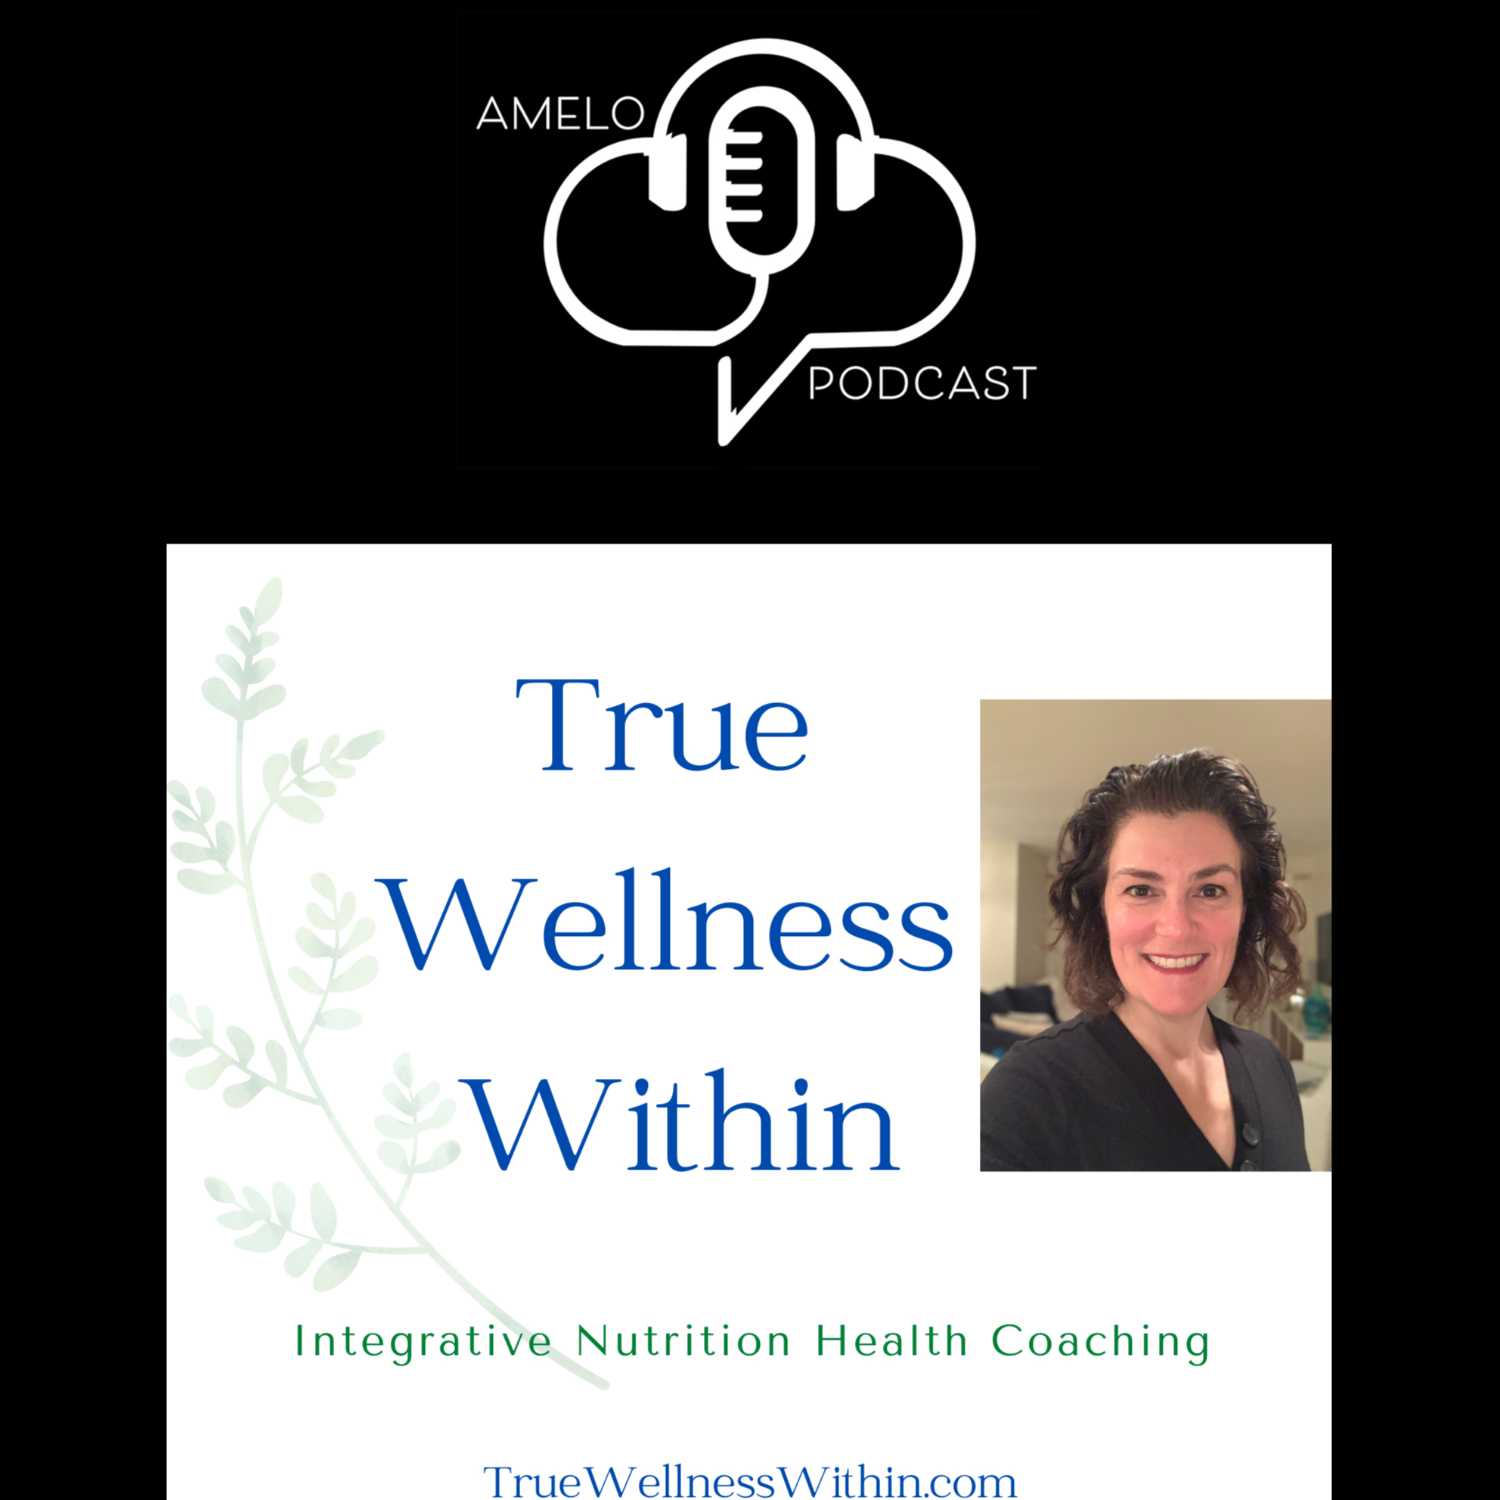 Susy Wood - Nutrition Health Coaching